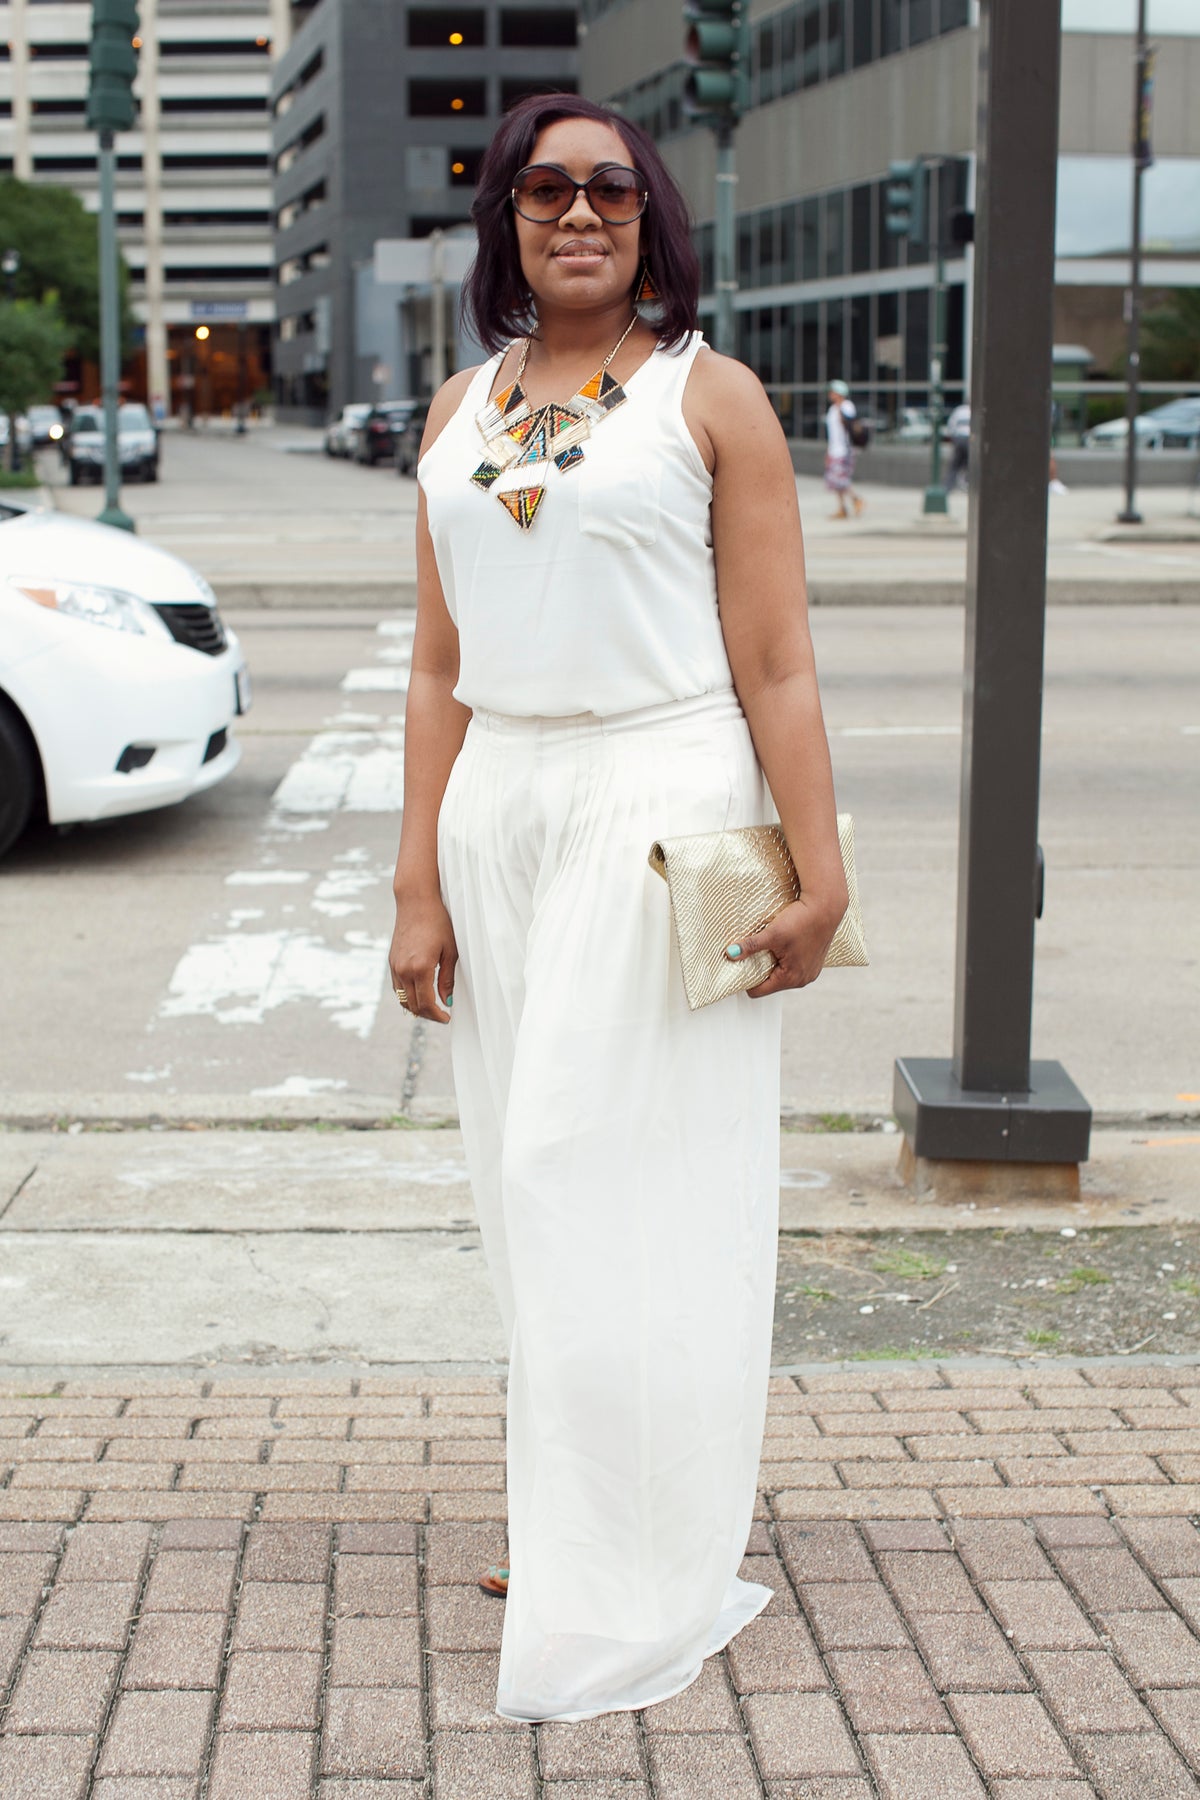 Street Style: Evening Looks at New Orleans Superdome - Essence